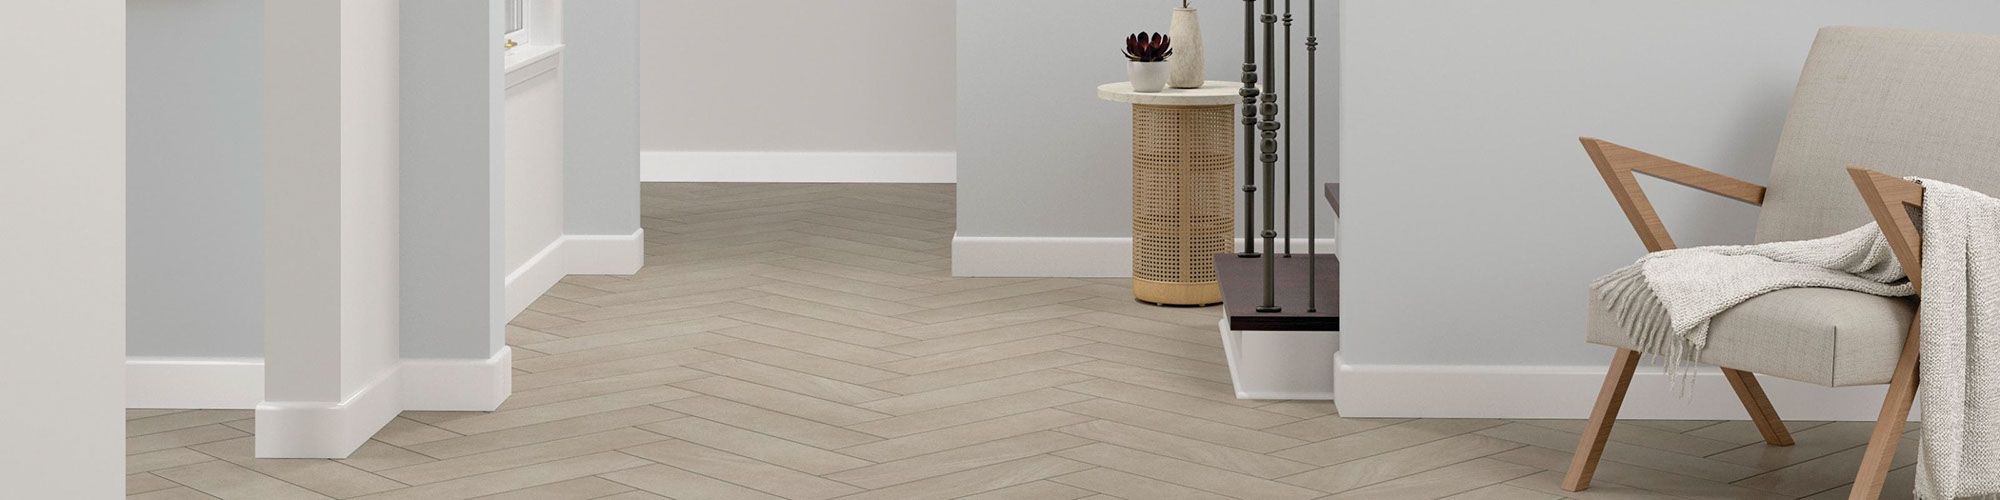 Foyer with gray floor tile that looks like stone set in a herringbone pattern, wood chair with off-white cushions.